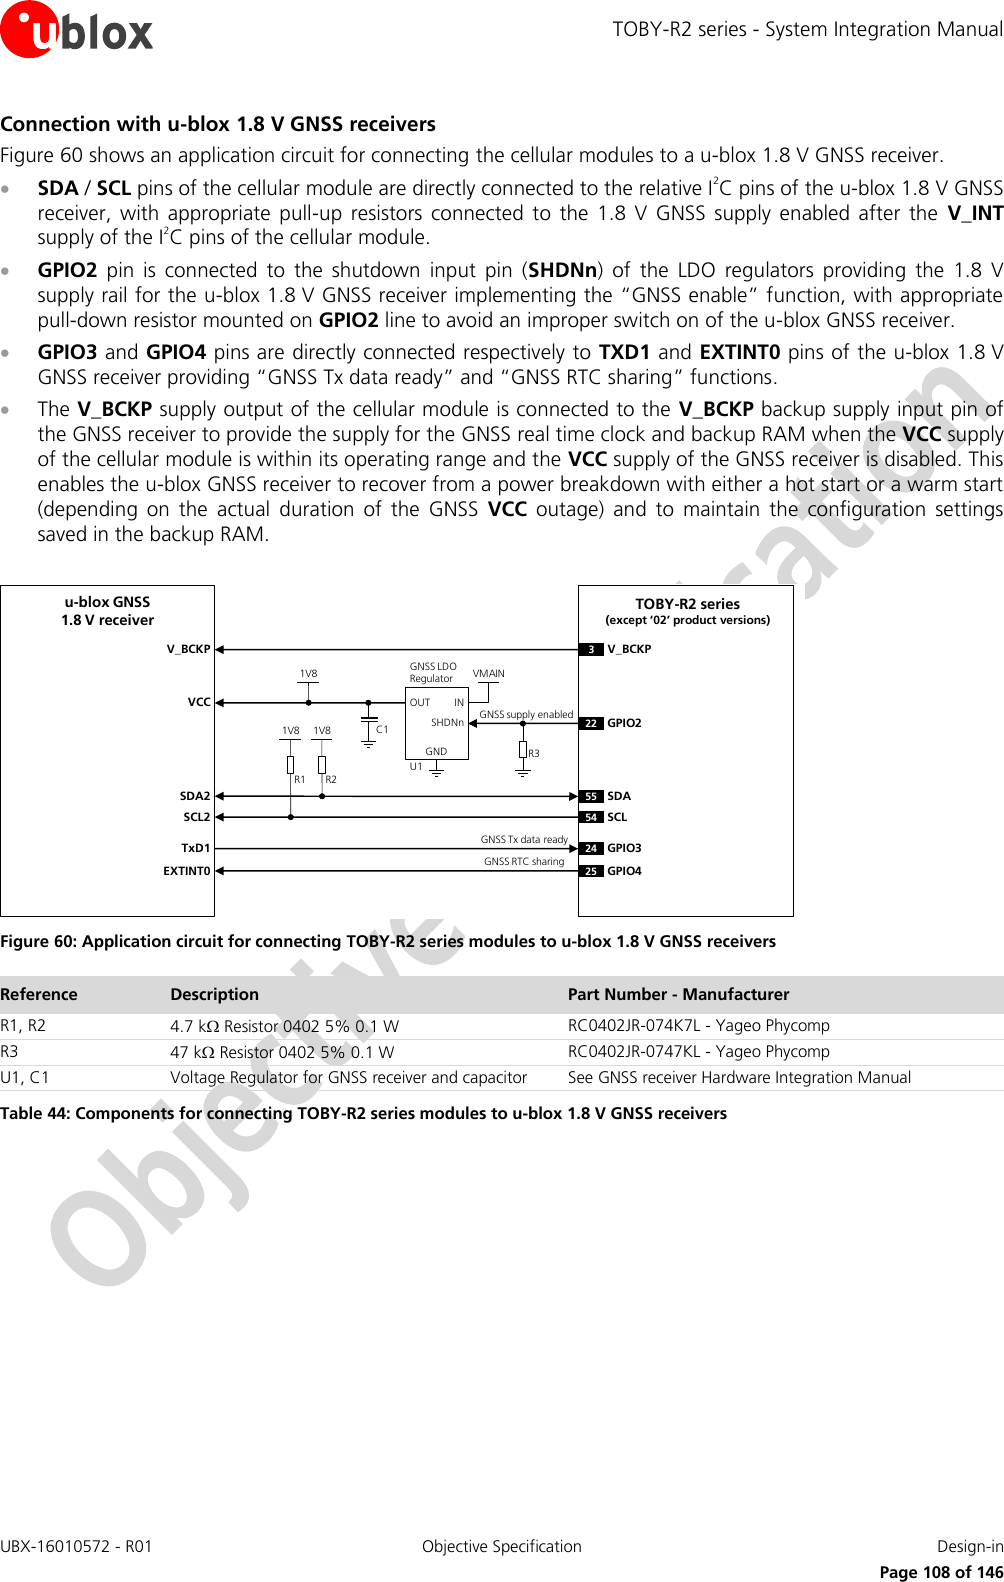 TOBY-R2 series - System Integration Manual UBX-16010572 - R01  Objective Specification  Design-in     Page 108 of 146 Connection with u-blox 1.8 V GNSS receivers Figure 60 shows an application circuit for connecting the cellular modules to a u-blox 1.8 V GNSS receiver.  SDA / SCL pins of the cellular module are directly connected to the relative I2C pins of the u-blox 1.8 V GNSS receiver,  with  appropriate  pull-up  resistors  connected  to  the  1.8  V GNSS  supply  enabled  after  the  V_INT supply of the I2C pins of the cellular module.  GPIO2  pin  is  connected  to  the  shutdown  input  pin  (SHDNn)  of  the  LDO  regulators  providing  the  1.8  V supply rail for the u-blox 1.8 V GNSS receiver implementing the “GNSS enable” function, with appropriate pull-down resistor mounted on GPIO2 line to avoid an improper switch on of the u-blox GNSS receiver.  GPIO3 and GPIO4 pins are directly connected respectively to TXD1 and EXTINT0 pins of the u-blox 1.8 V GNSS receiver providing “GNSS Tx data ready” and “GNSS RTC sharing” functions.  The V_BCKP supply output of the cellular module is connected to the  V_BCKP backup supply input pin of the GNSS receiver to provide the supply for the GNSS real time clock and backup RAM when the VCC supply of the cellular module is within its operating range and the VCC supply of the GNSS receiver is disabled. This enables the u-blox GNSS receiver to recover from a power breakdown with either a hot start or a warm start (depending  on  the  actual  duration  of  the  GNSS  VCC  outage)  and  to  maintain  the  configuration  settings saved in the backup RAM.  R1INOUTGNDGNSS LDORegulatorSHDNnu-blox GNSS1.8 V receiverSDA2SCL2R21V8 1V8VMAIN1V8U122 GPIO2SDASCLC1TxD1 GPIO3555424VCCR3V_BCKP V_BCKP3GNSS Tx data readyGNSS supply enabledTOBY-R2 series(except ‘02’ product versions)EXTINT0 GPIO425GNSS RTC sharing Figure 60: Application circuit for connecting TOBY-R2 series modules to u-blox 1.8 V GNSS receivers Reference Description Part Number - Manufacturer R1, R2 4.7 k Resistor 0402 5% 0.1 W  RC0402JR-074K7L - Yageo Phycomp R3 47 k Resistor 0402 5% 0.1 W  RC0402JR-0747KL - Yageo Phycomp U1, C1 Voltage Regulator for GNSS receiver and capacitor See GNSS receiver Hardware Integration Manual Table 44: Components for connecting TOBY-R2 series modules to u-blox 1.8 V GNSS receivers  